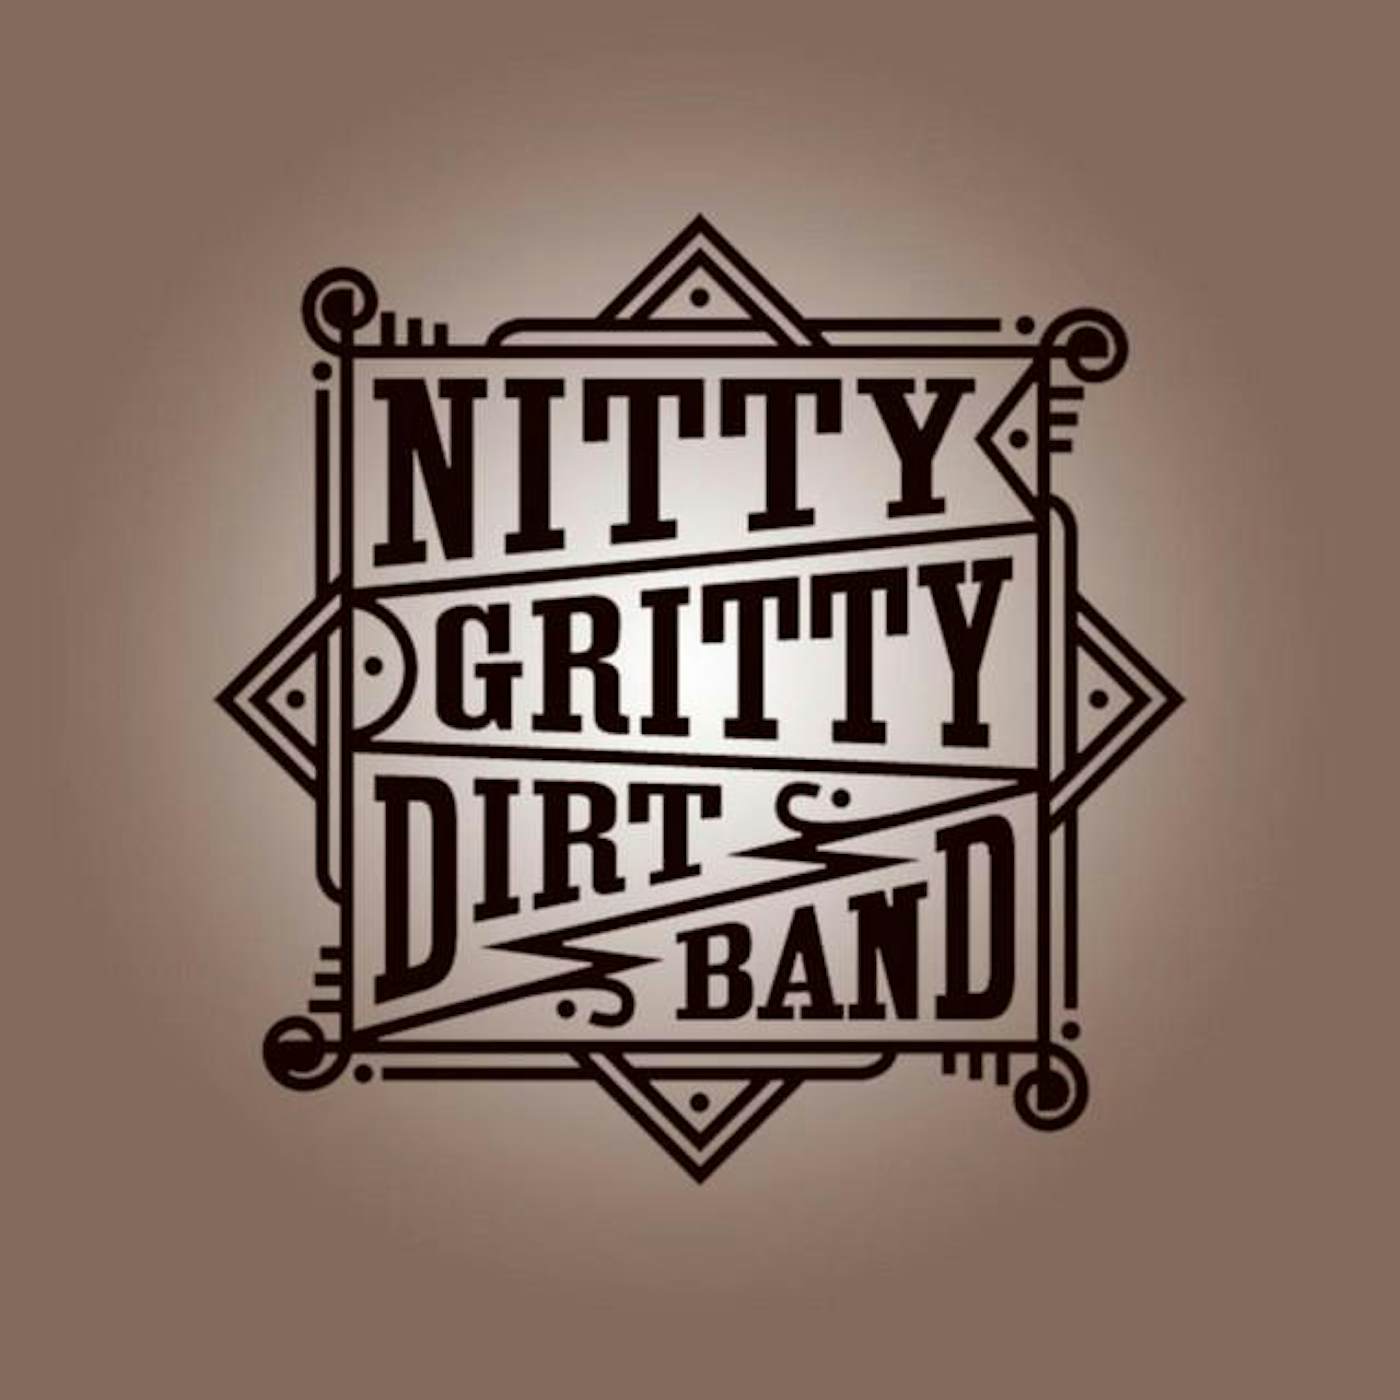 The Nitty Gritty Dirty Band